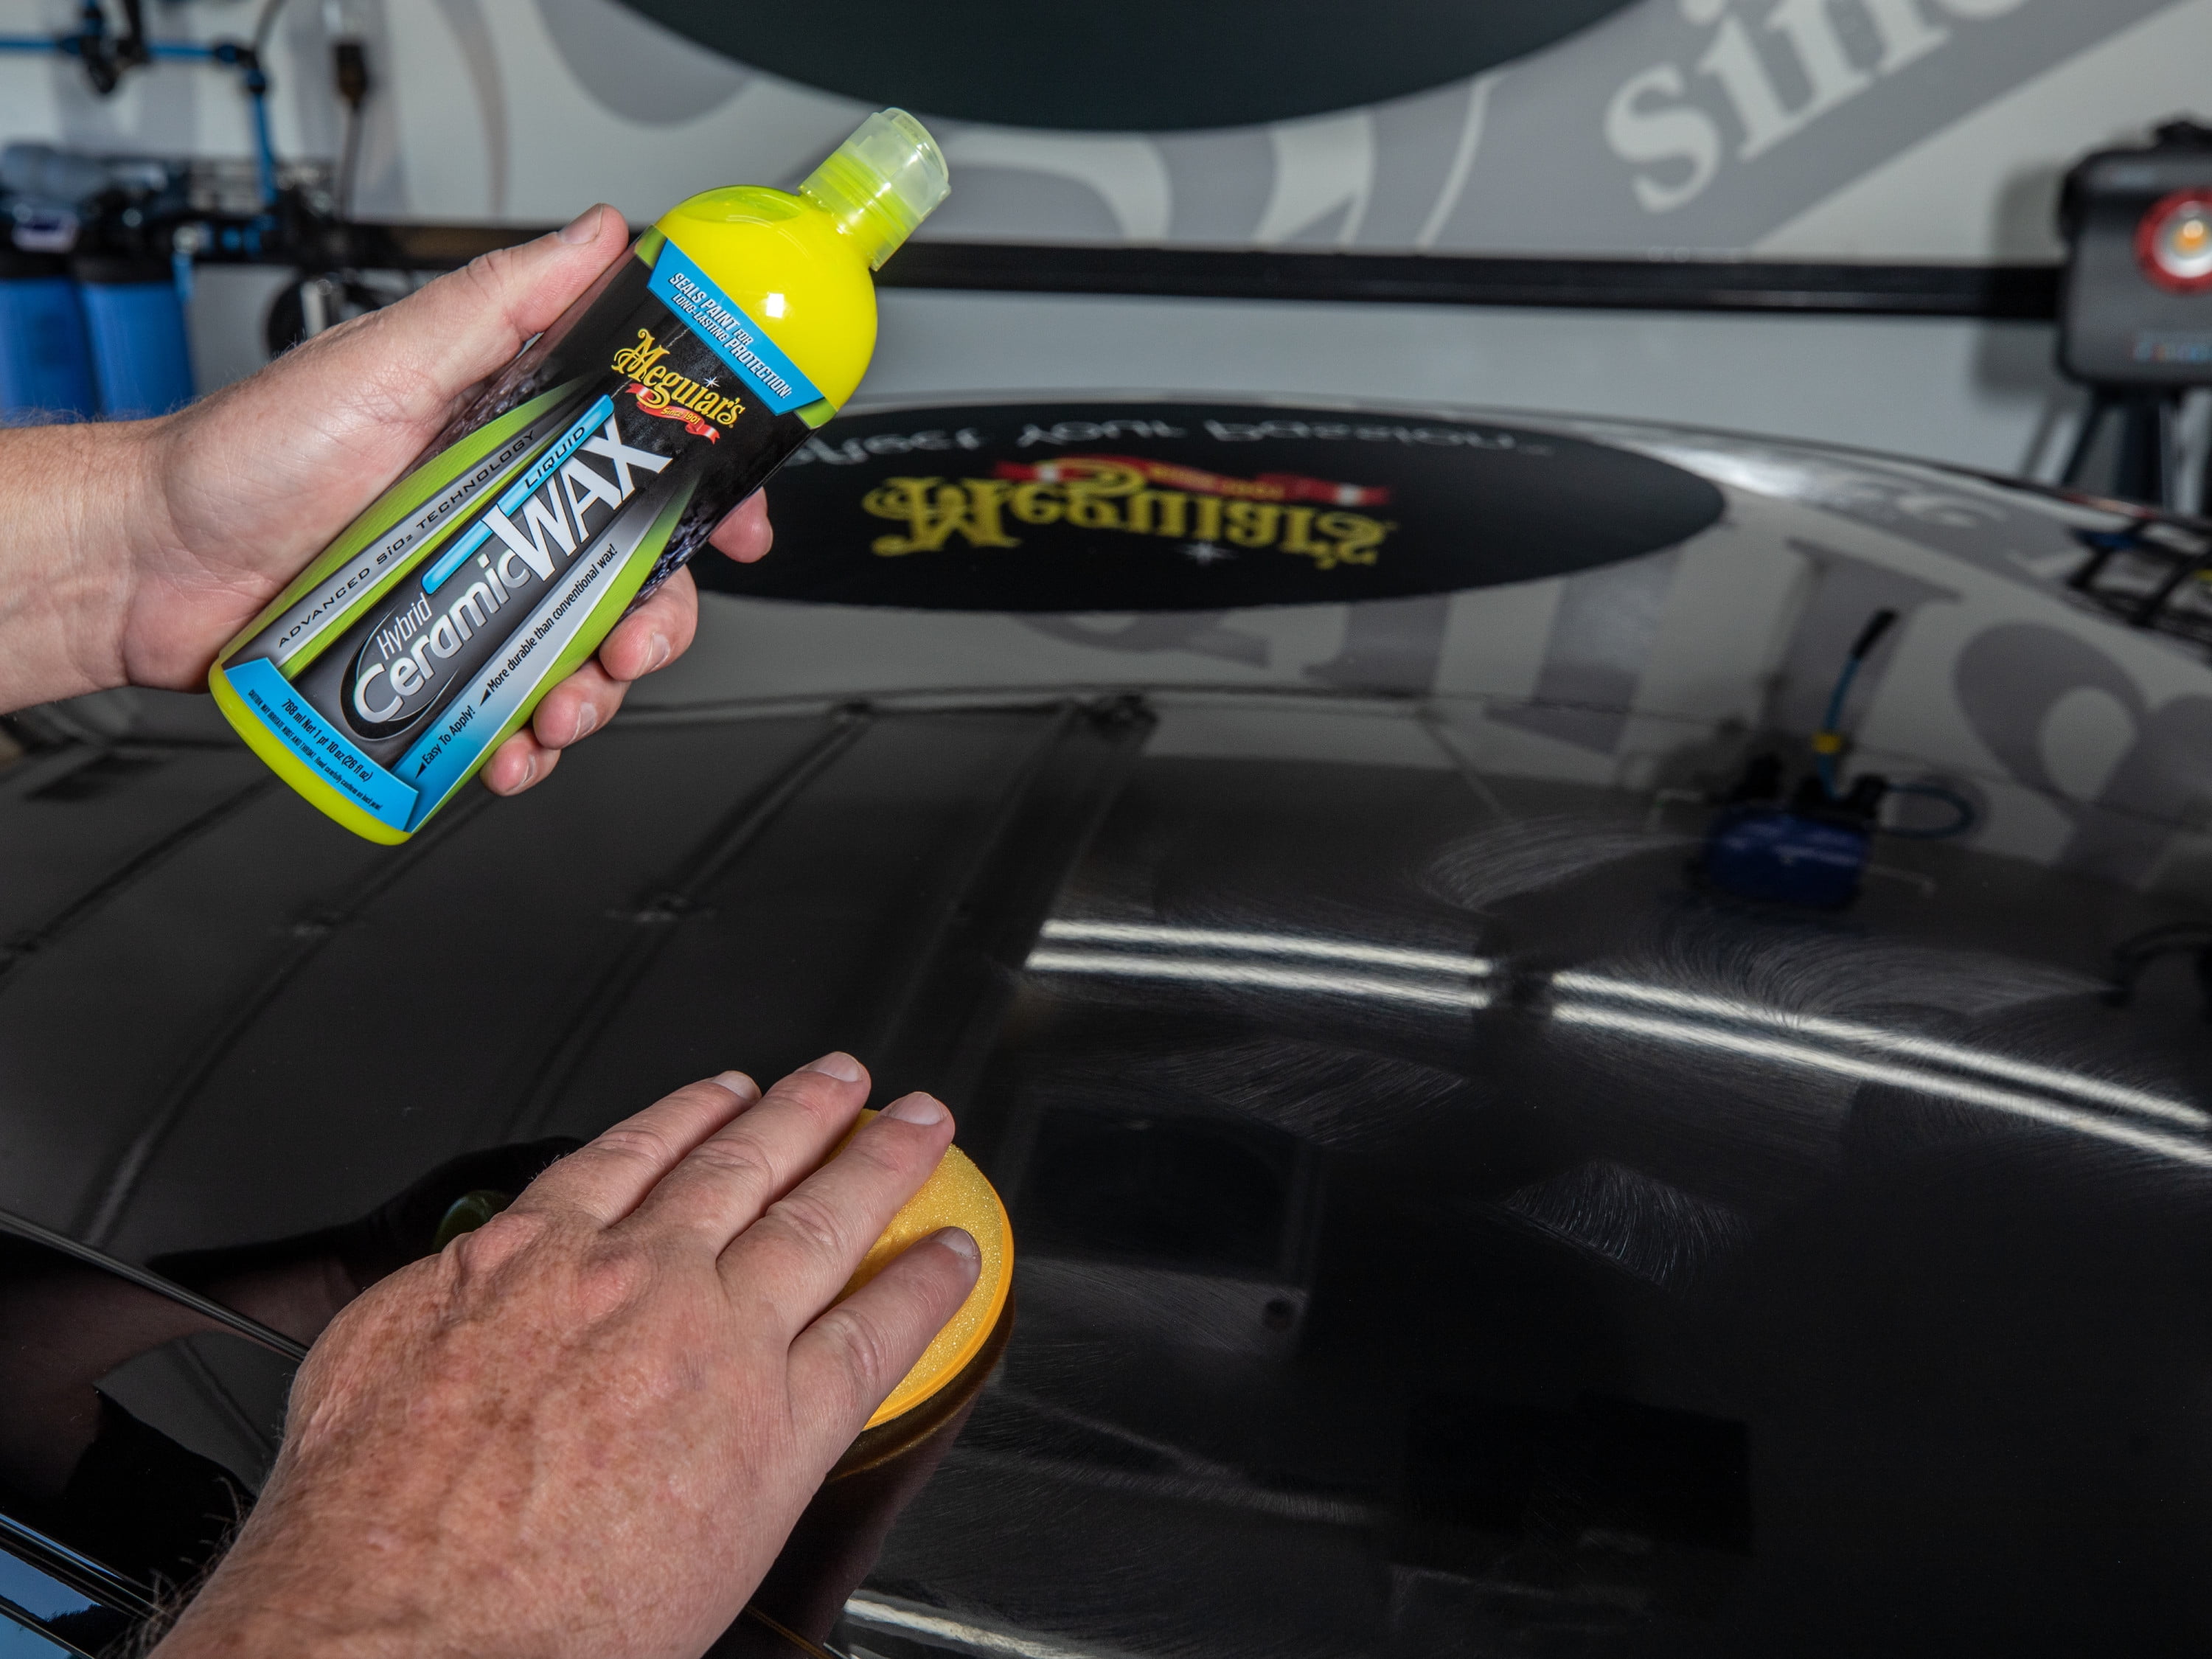 Meguiar's Ceramic Wax: Real World Test And Review - Prep My Car